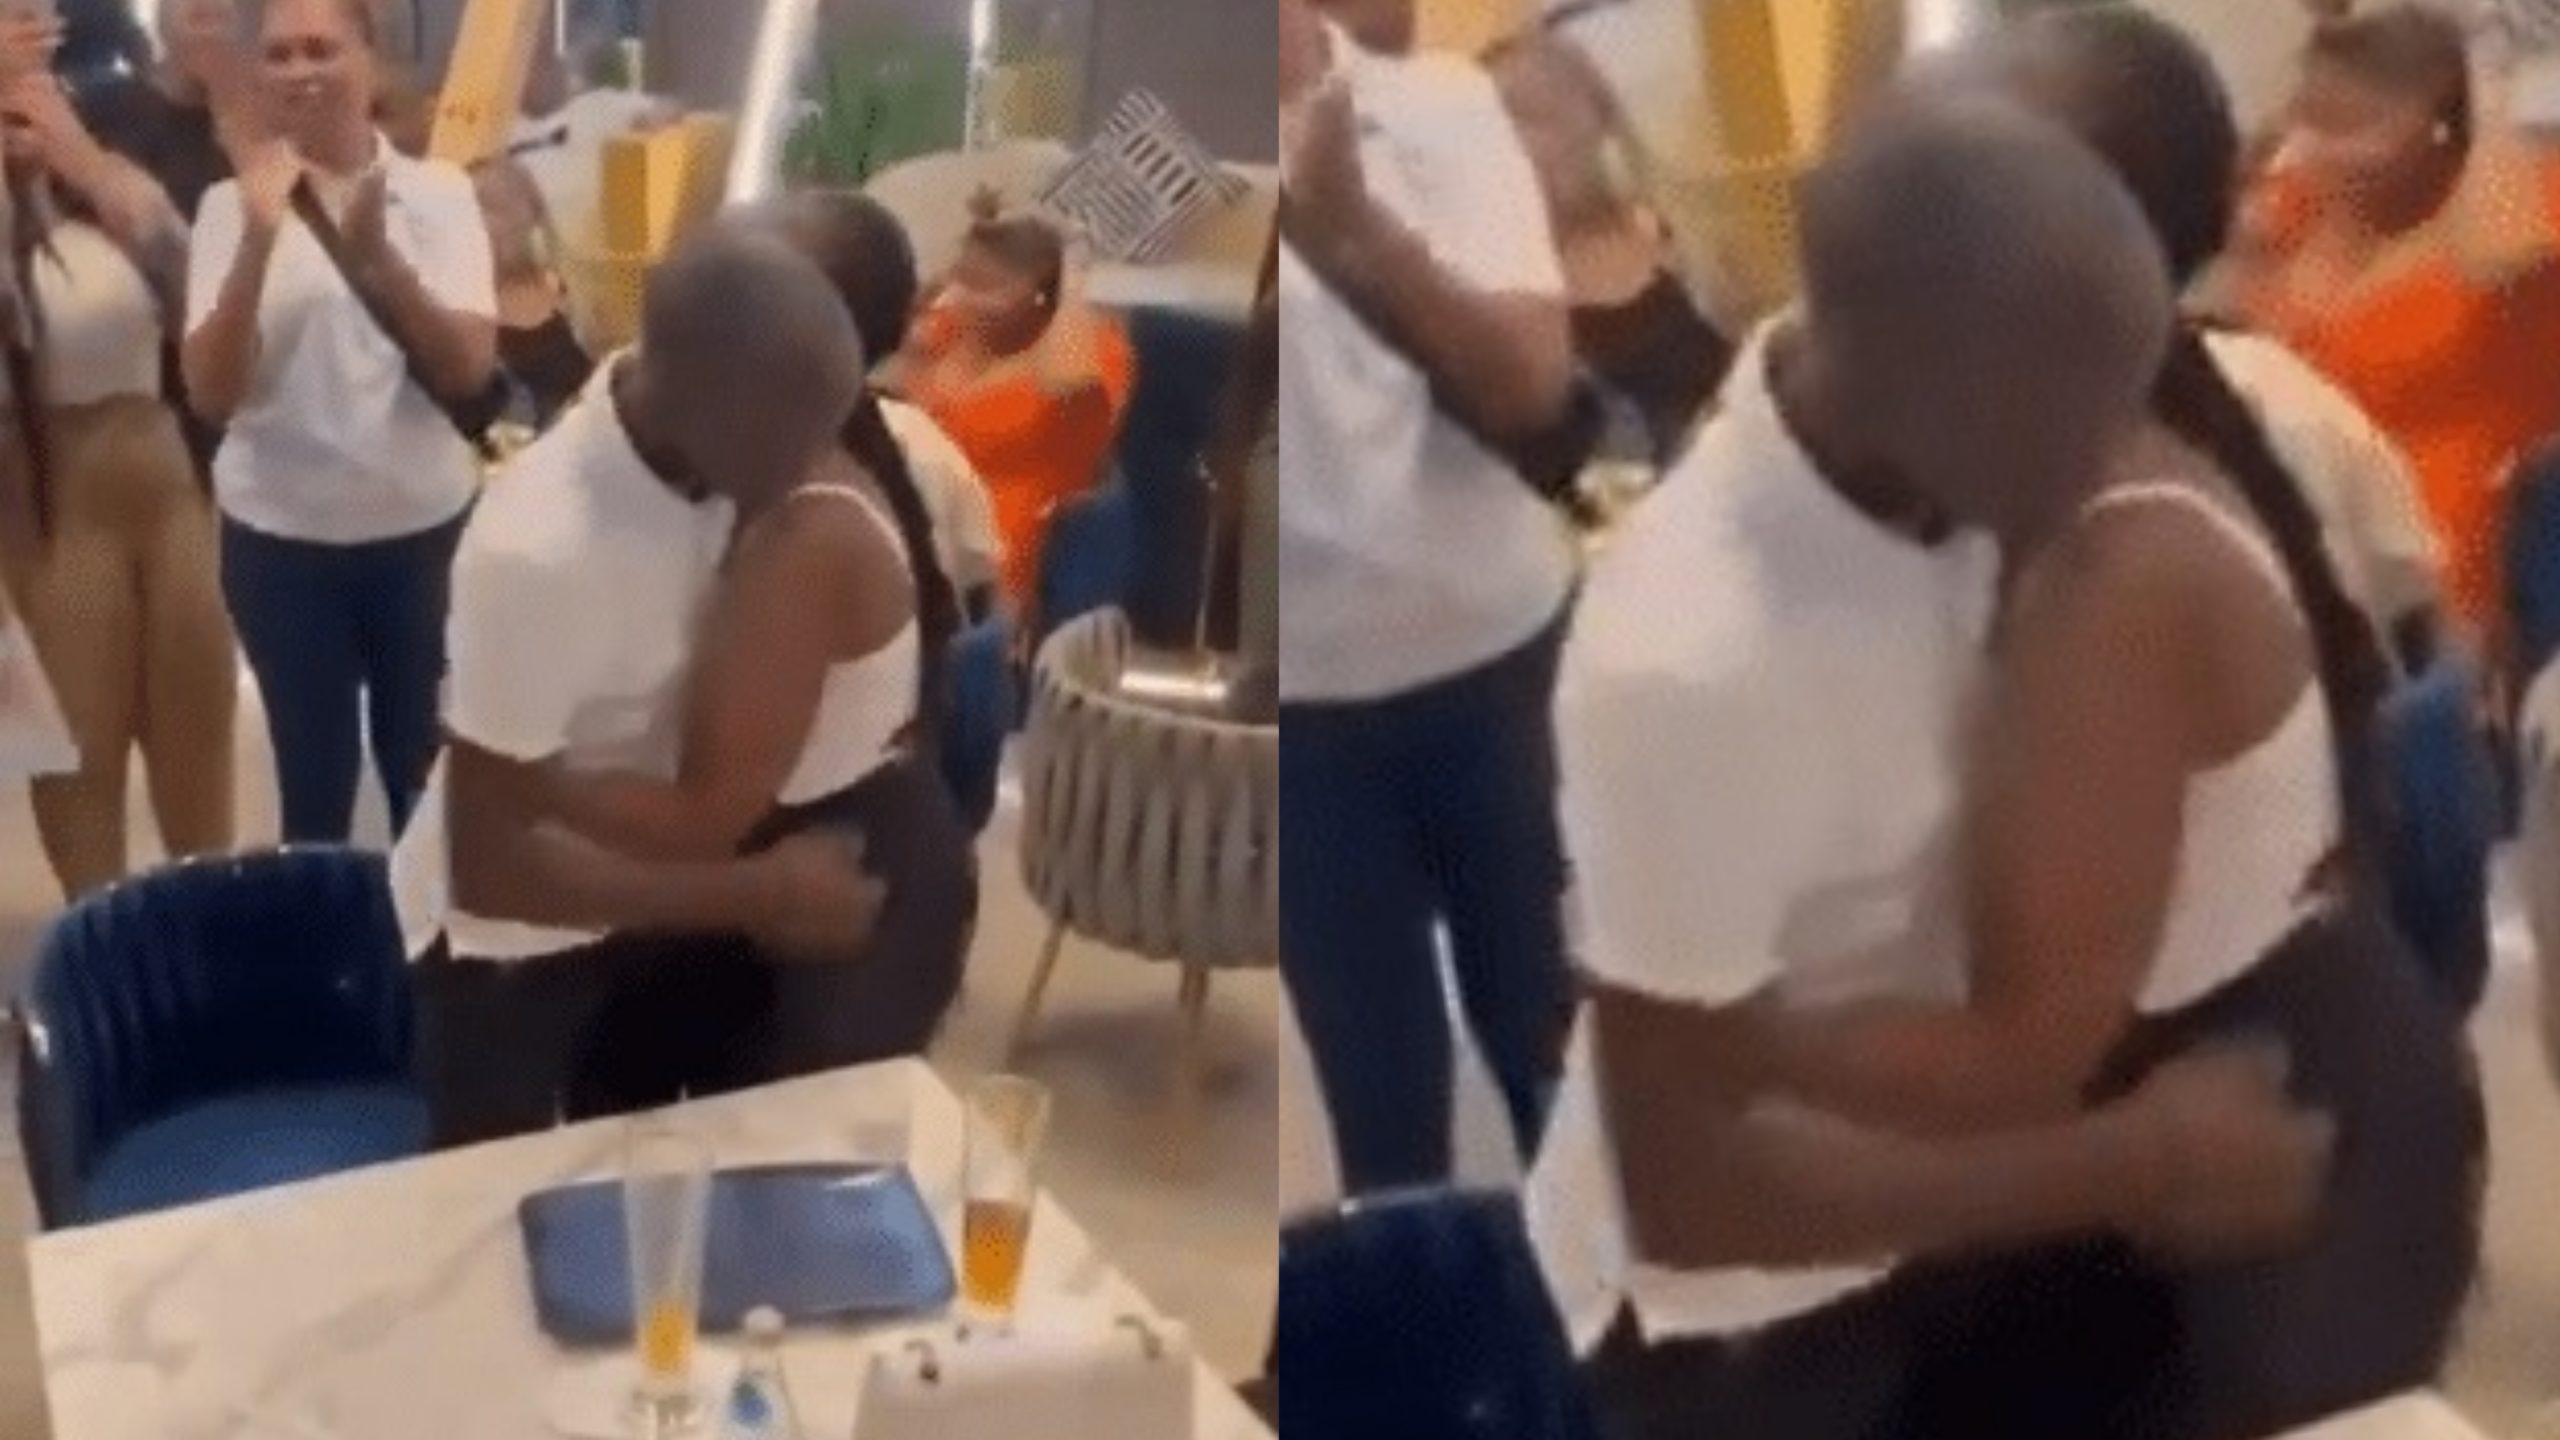 Man was left surprised after his girlfriend proposed to him at a restaurant. 